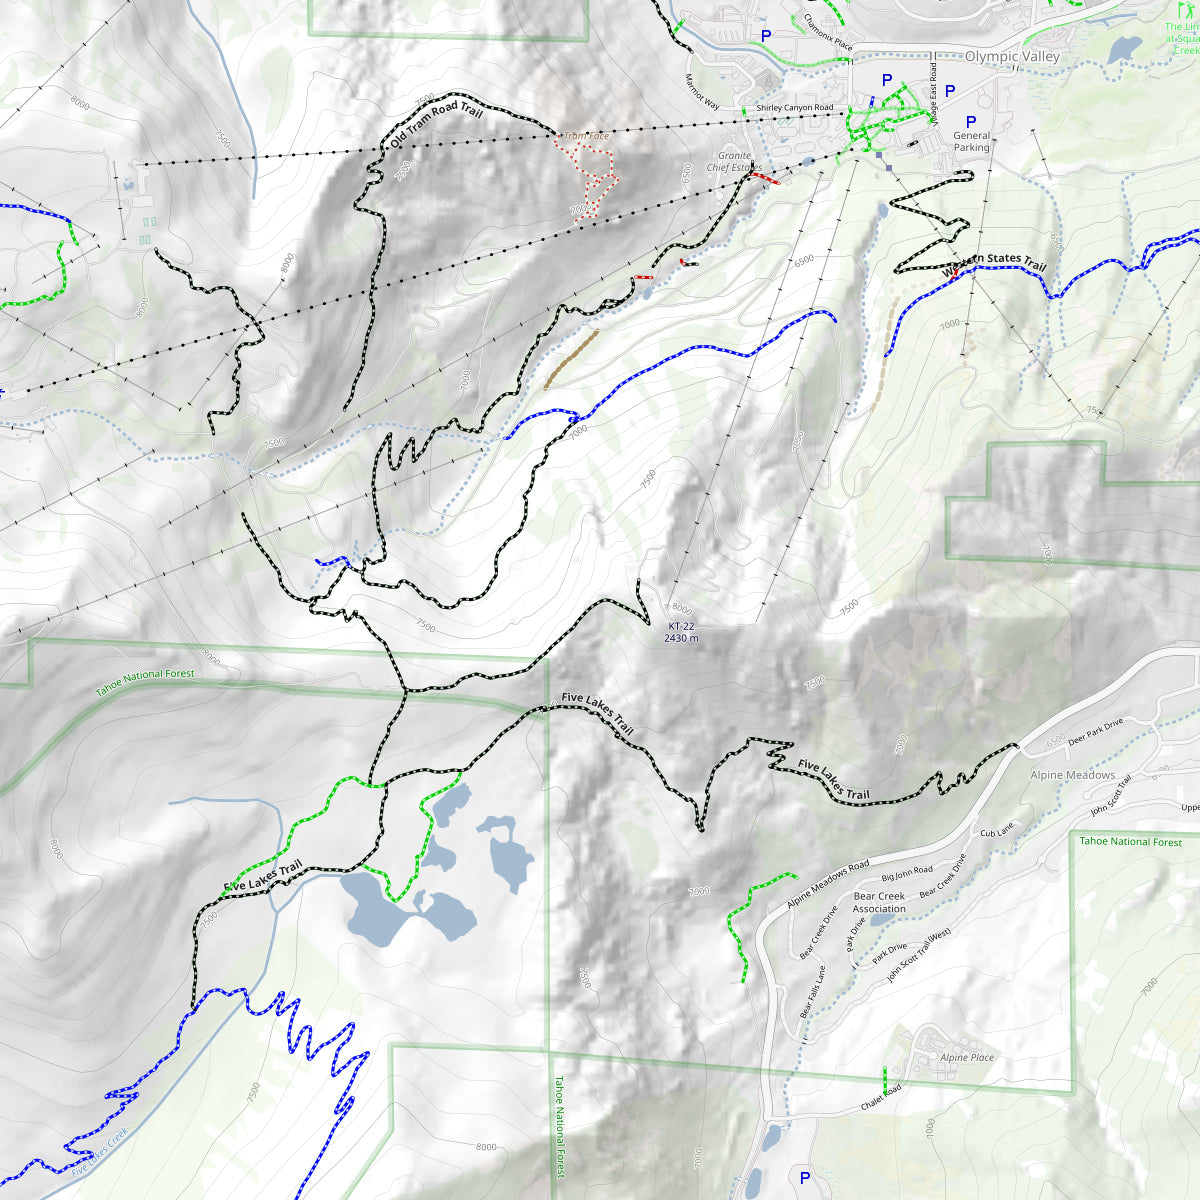 North Lake Tahoe Trail Steepness Map Map By Orbital View Inc